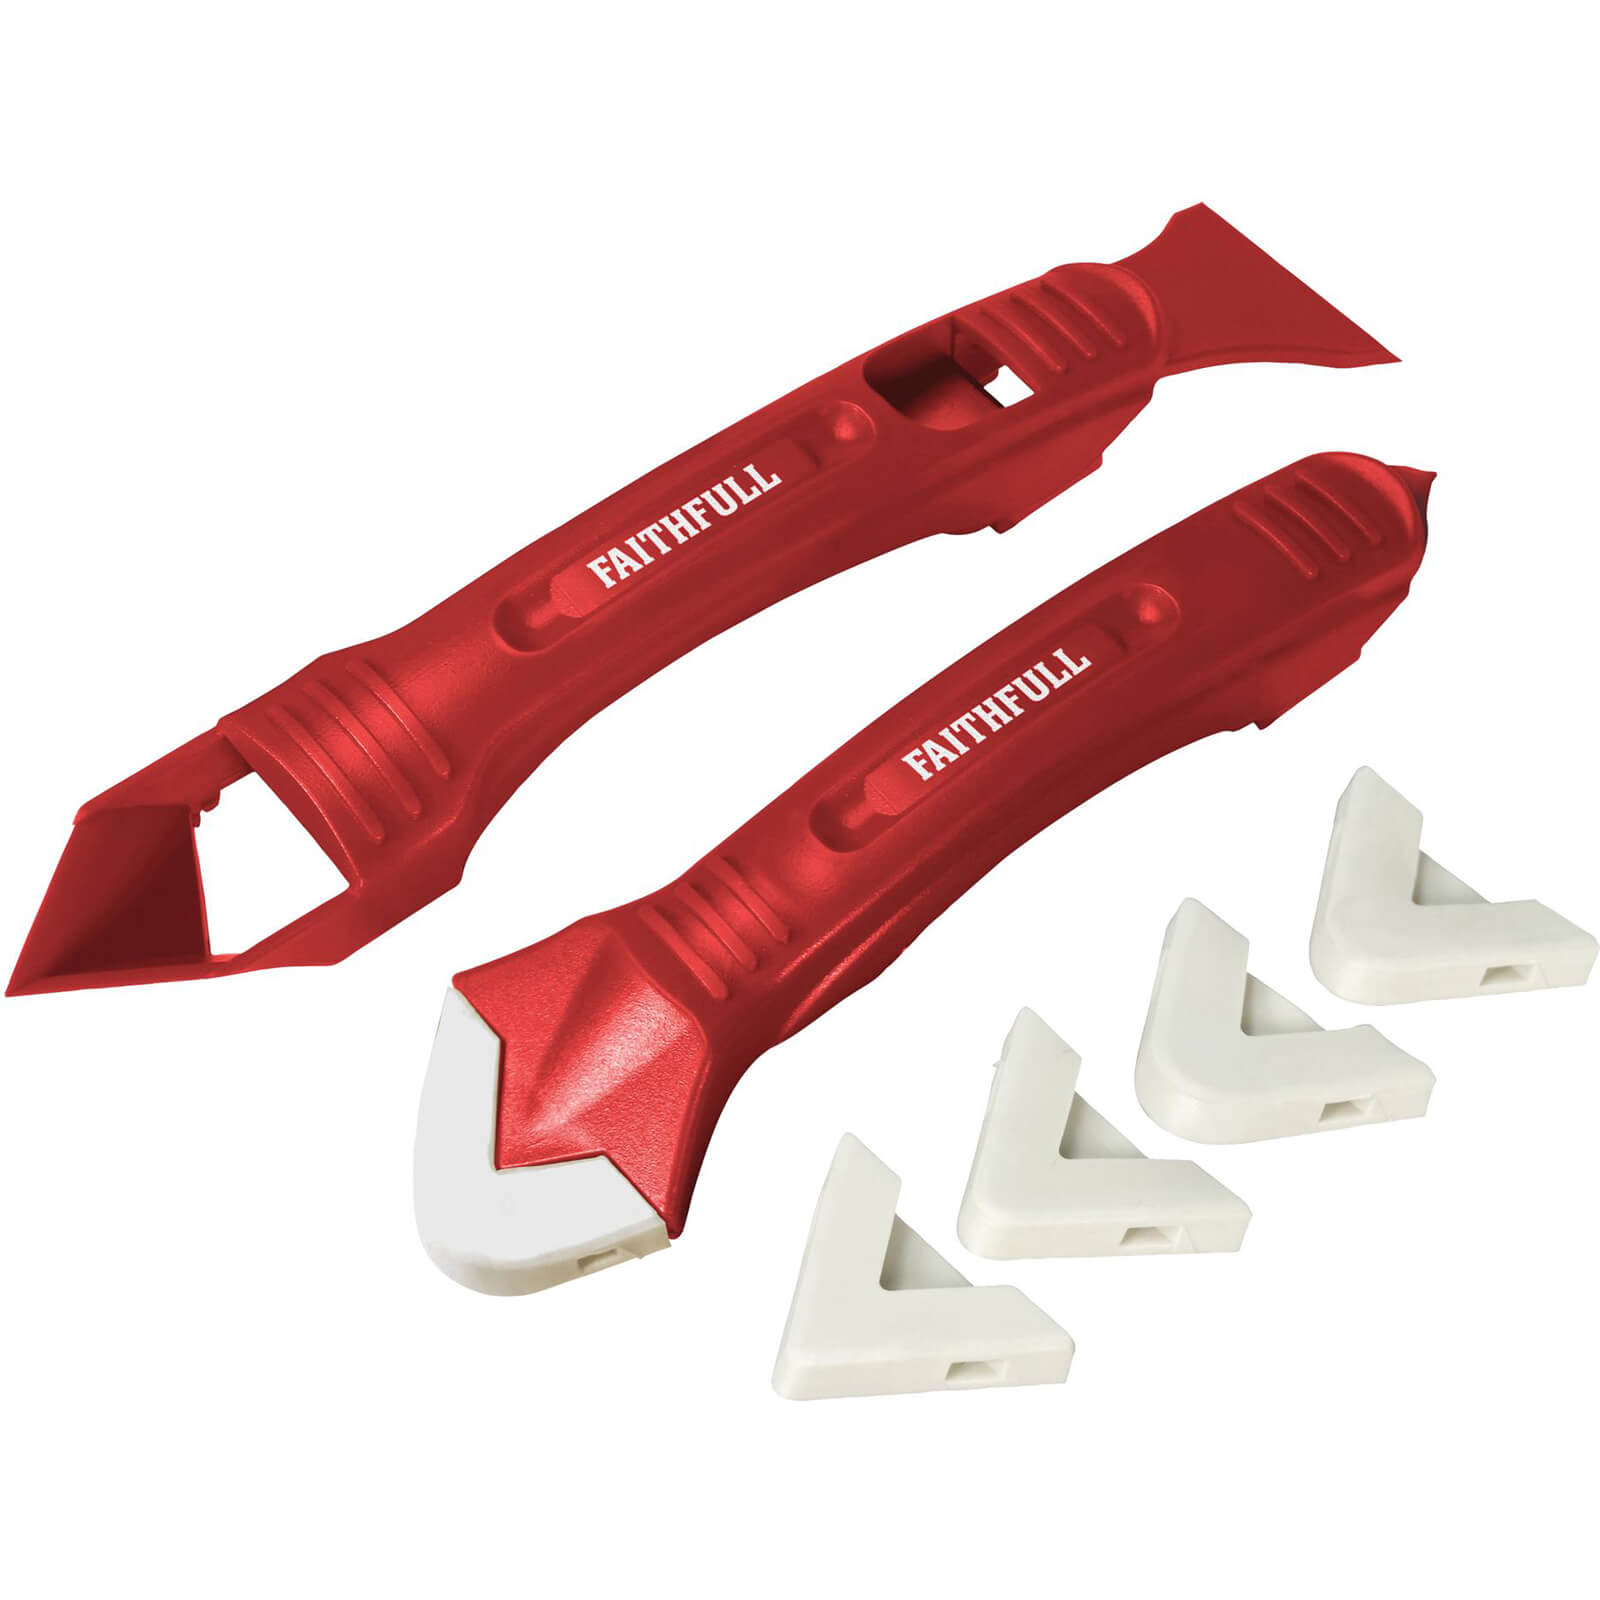 Image of Faithfull 2 Piece Silicone / Grout Removal and Finishing Tool Kit